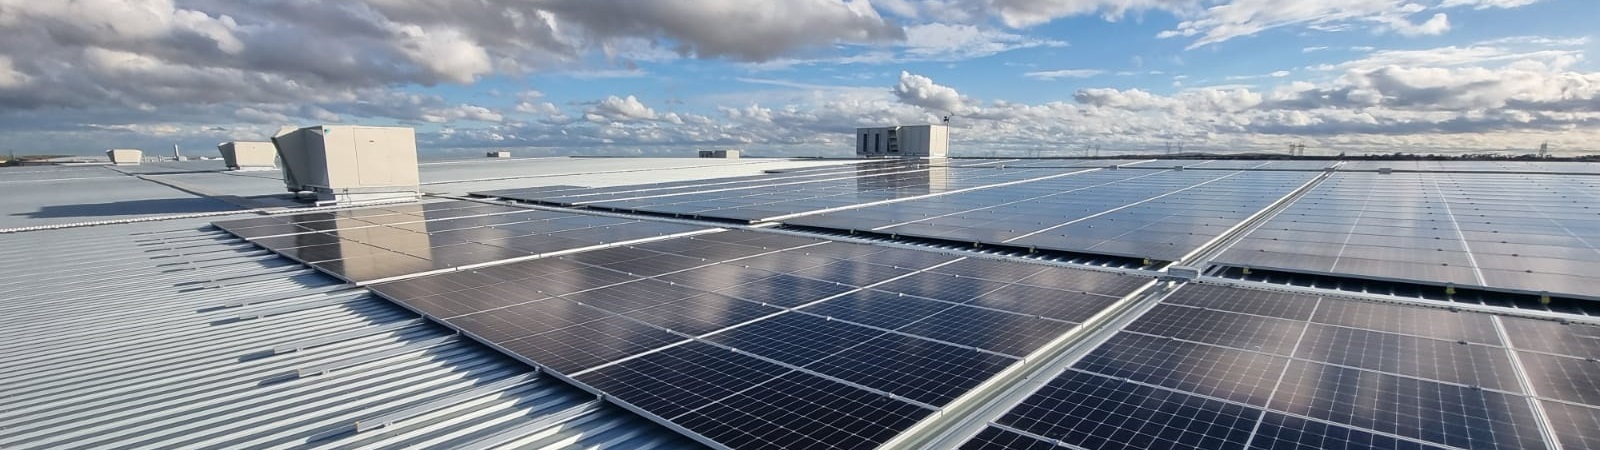 Maintenance of Commercial Solar Power Systems